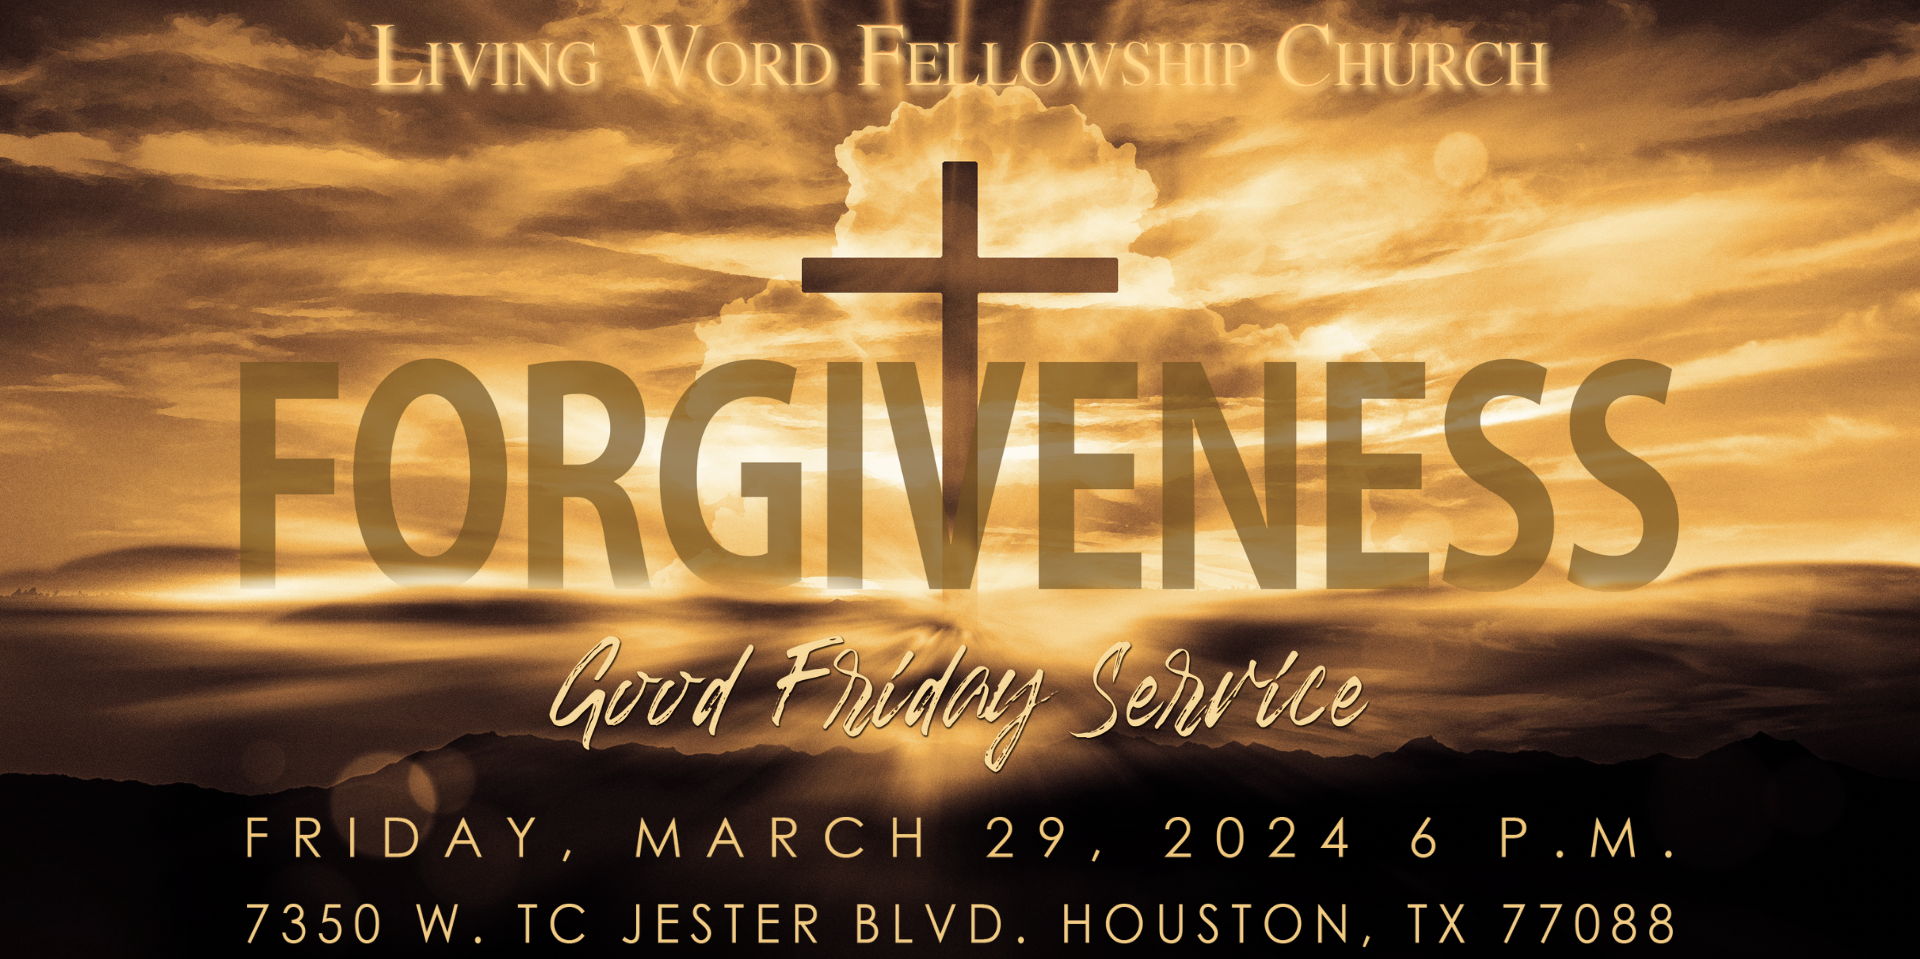 Good Friday Service - LWFC Drama Ministry Presents "Forgiveness" promotional image